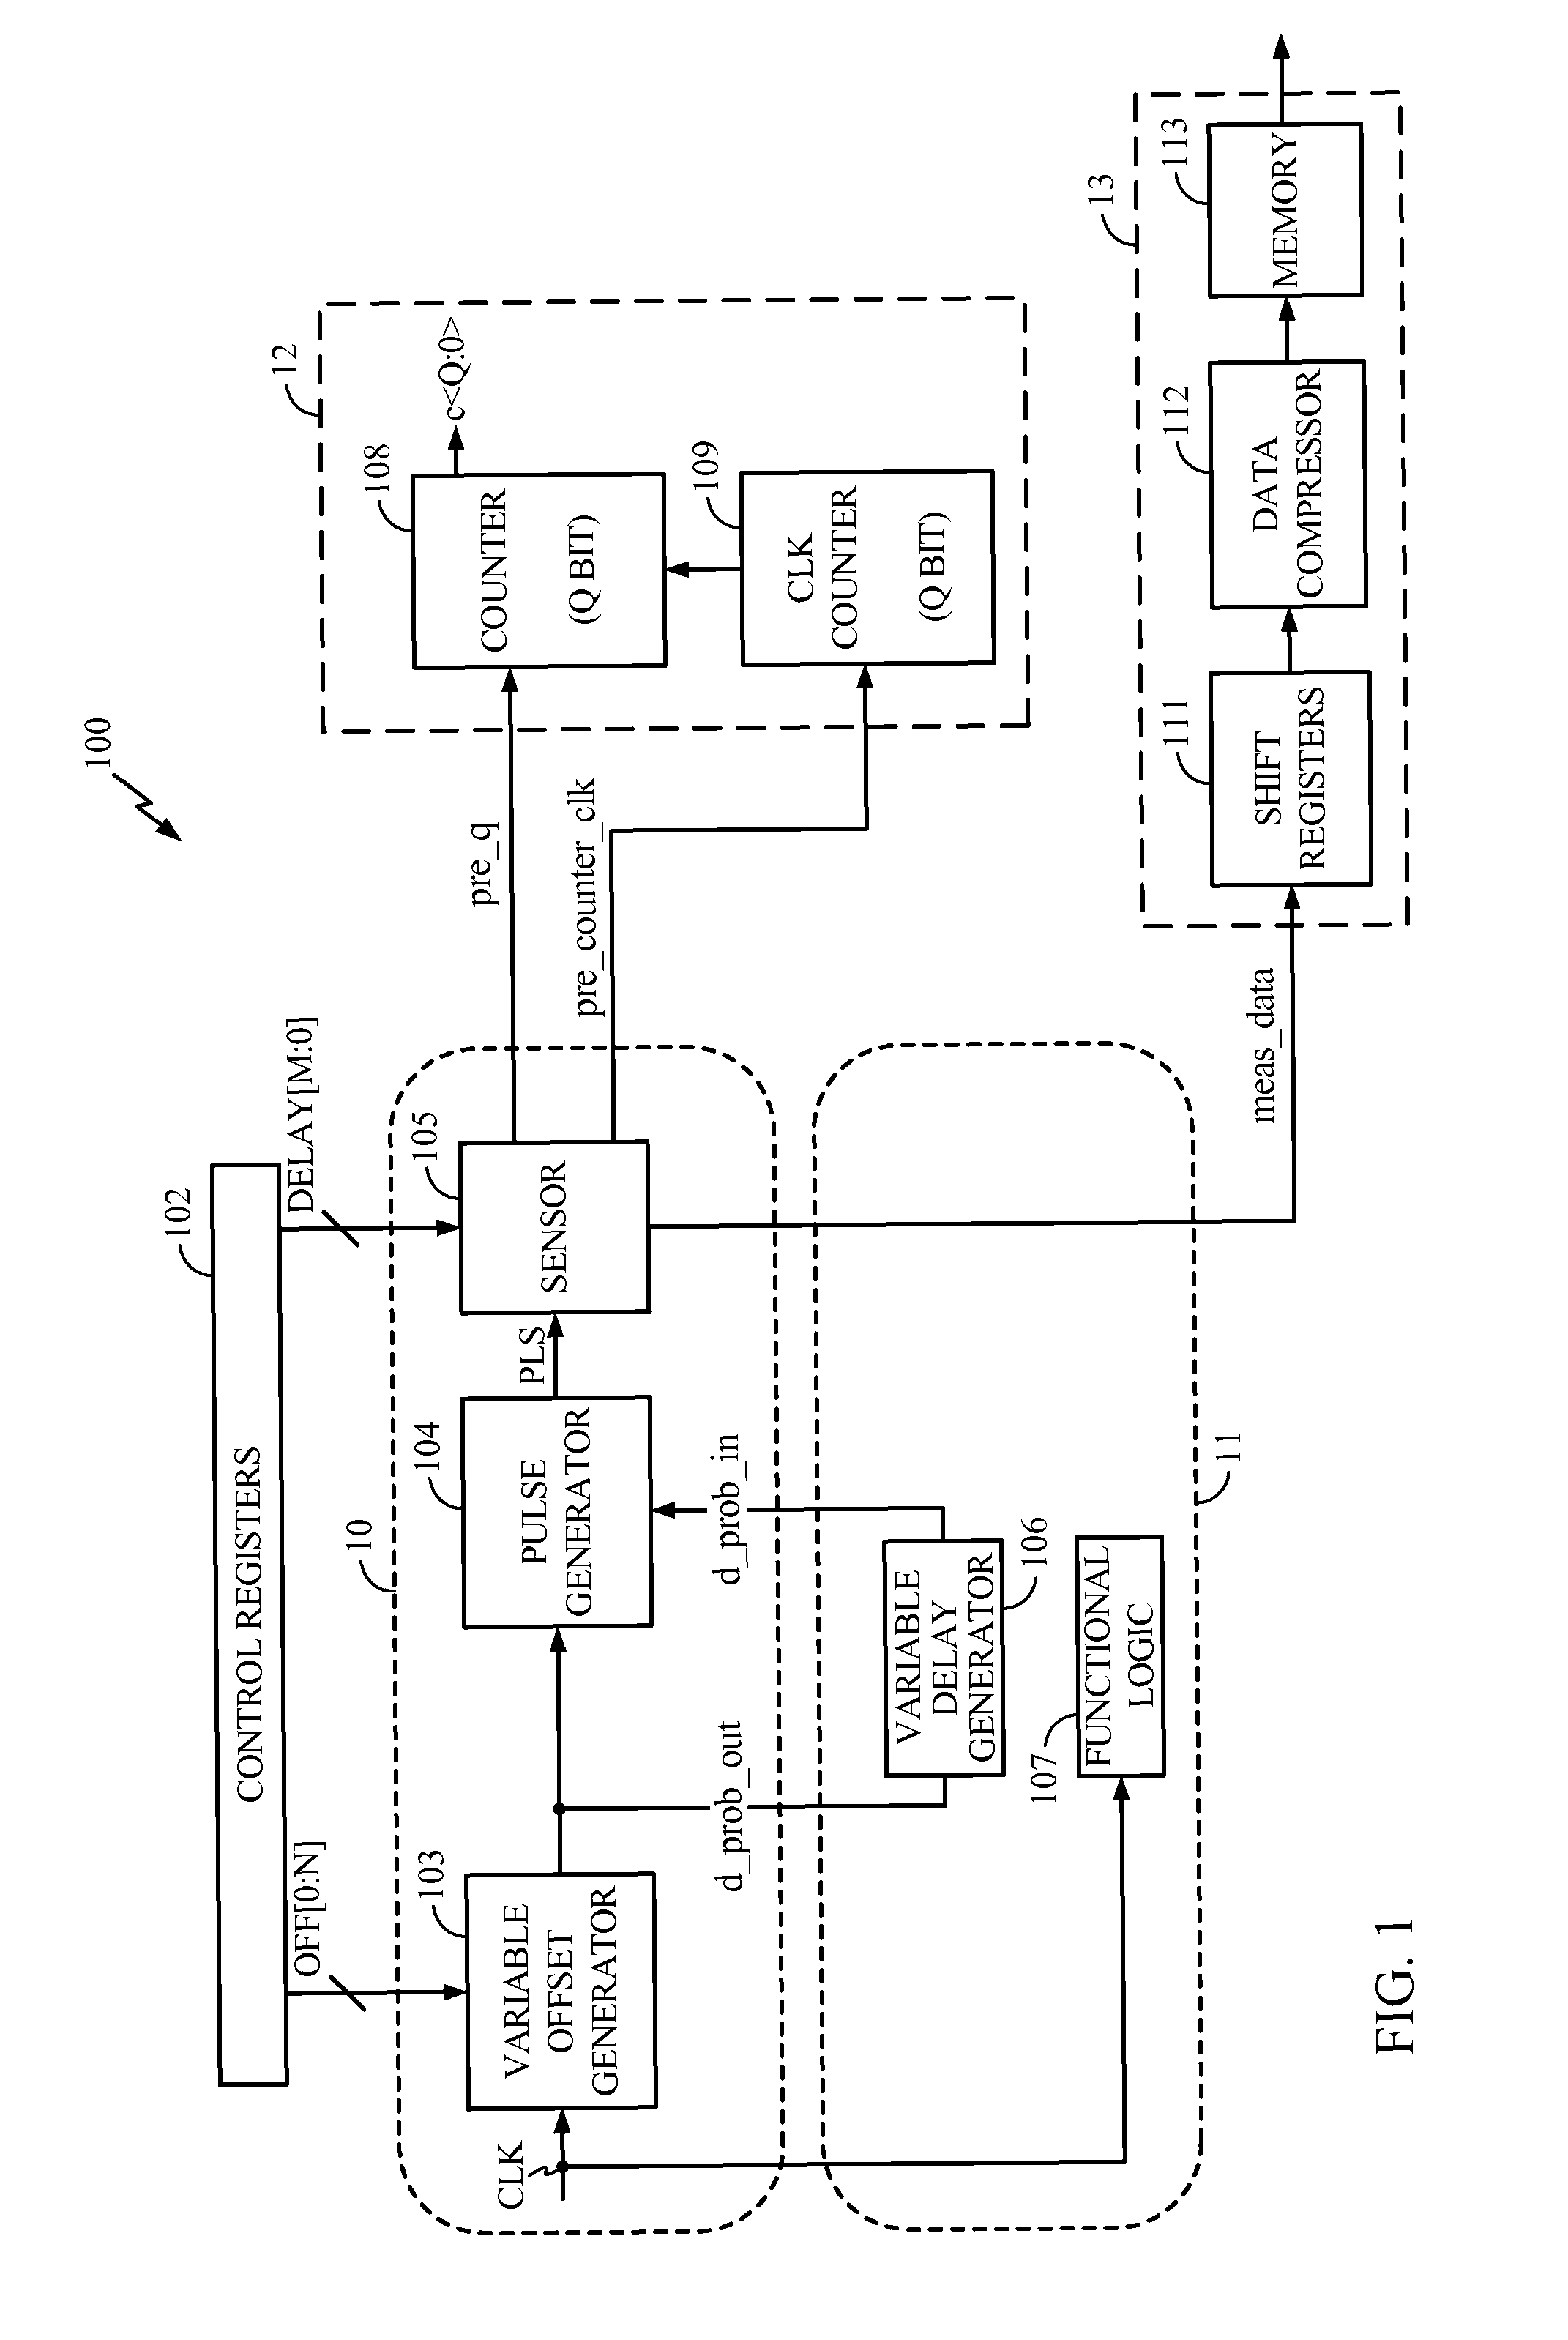 On-chip sensor for measuring dynamic power supply noise of the semiconductor chip